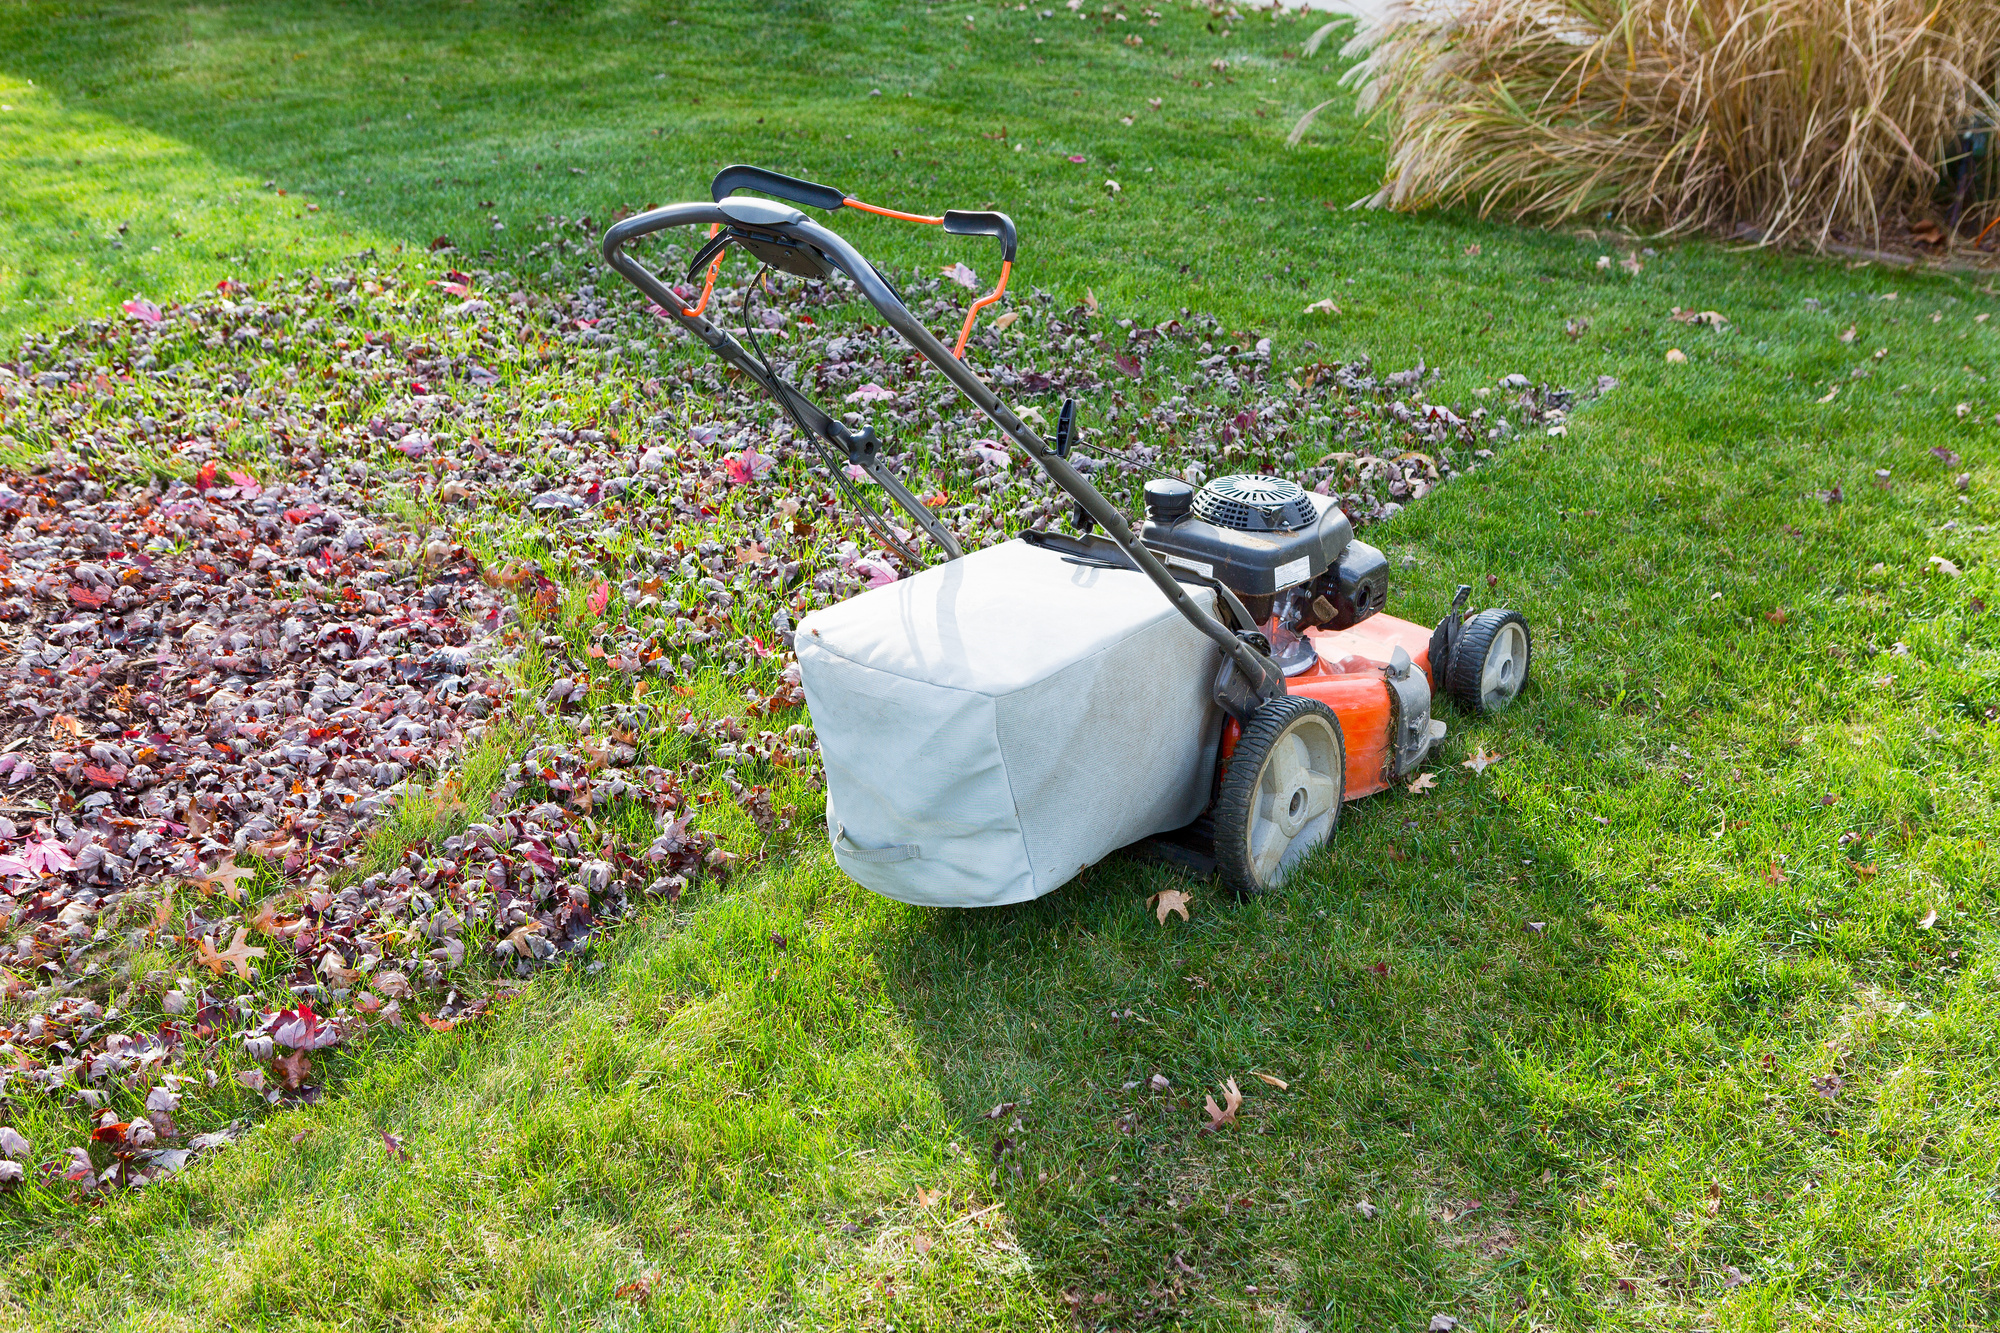 Get Ready for Leaves! Your Fall Lawn Care Checklist